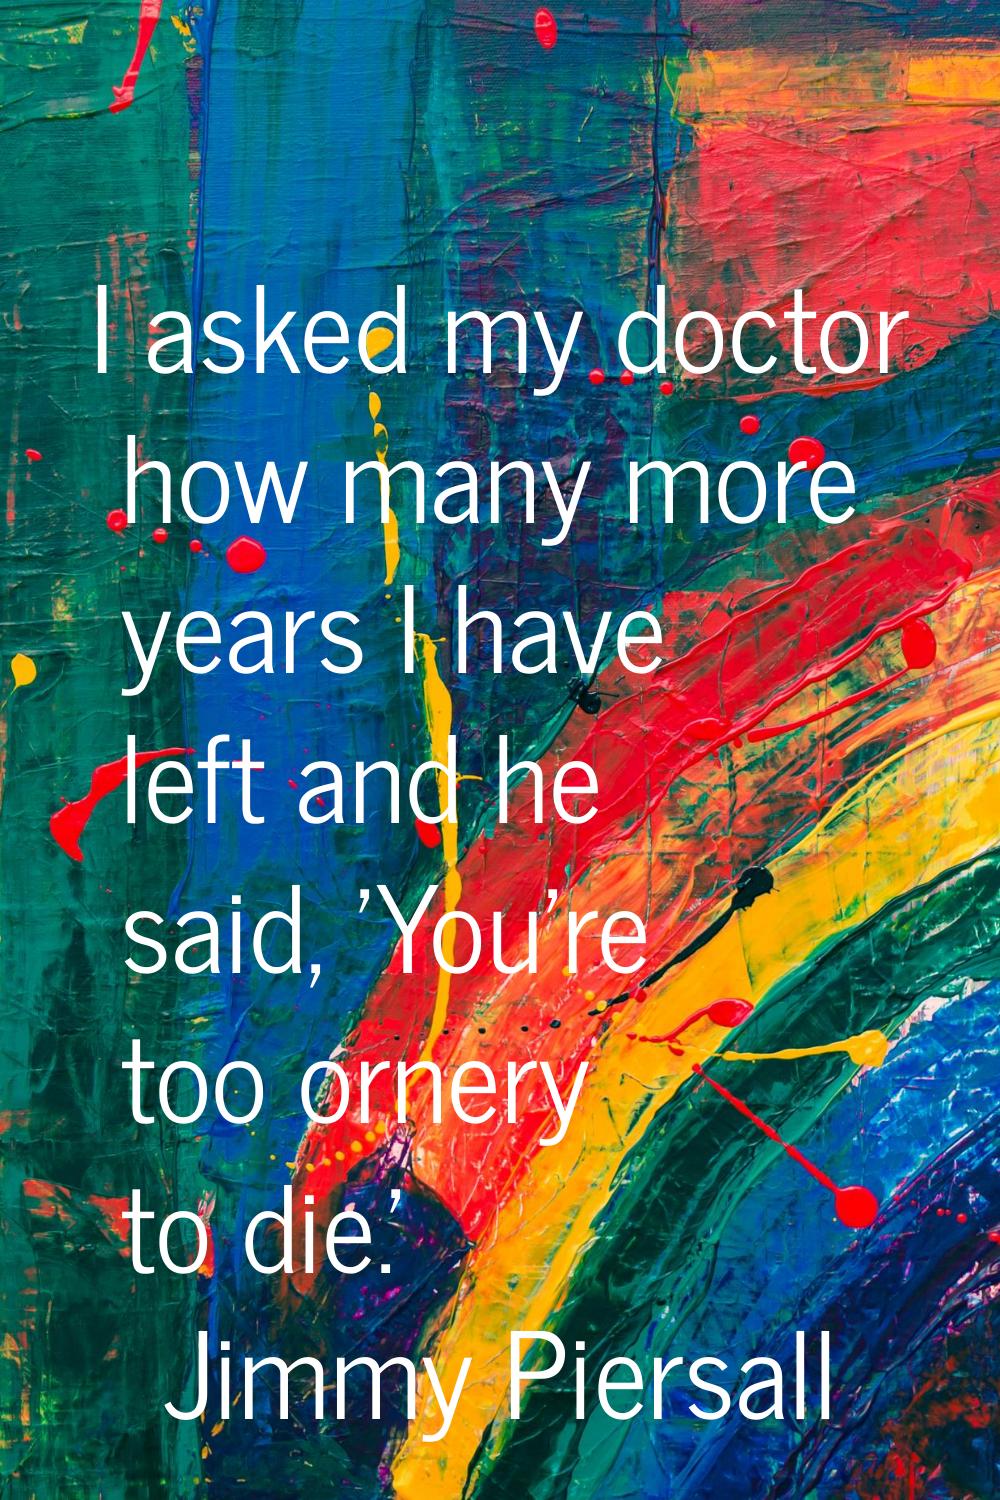 I asked my doctor how many more years I have left and he said, 'You're too ornery to die.'